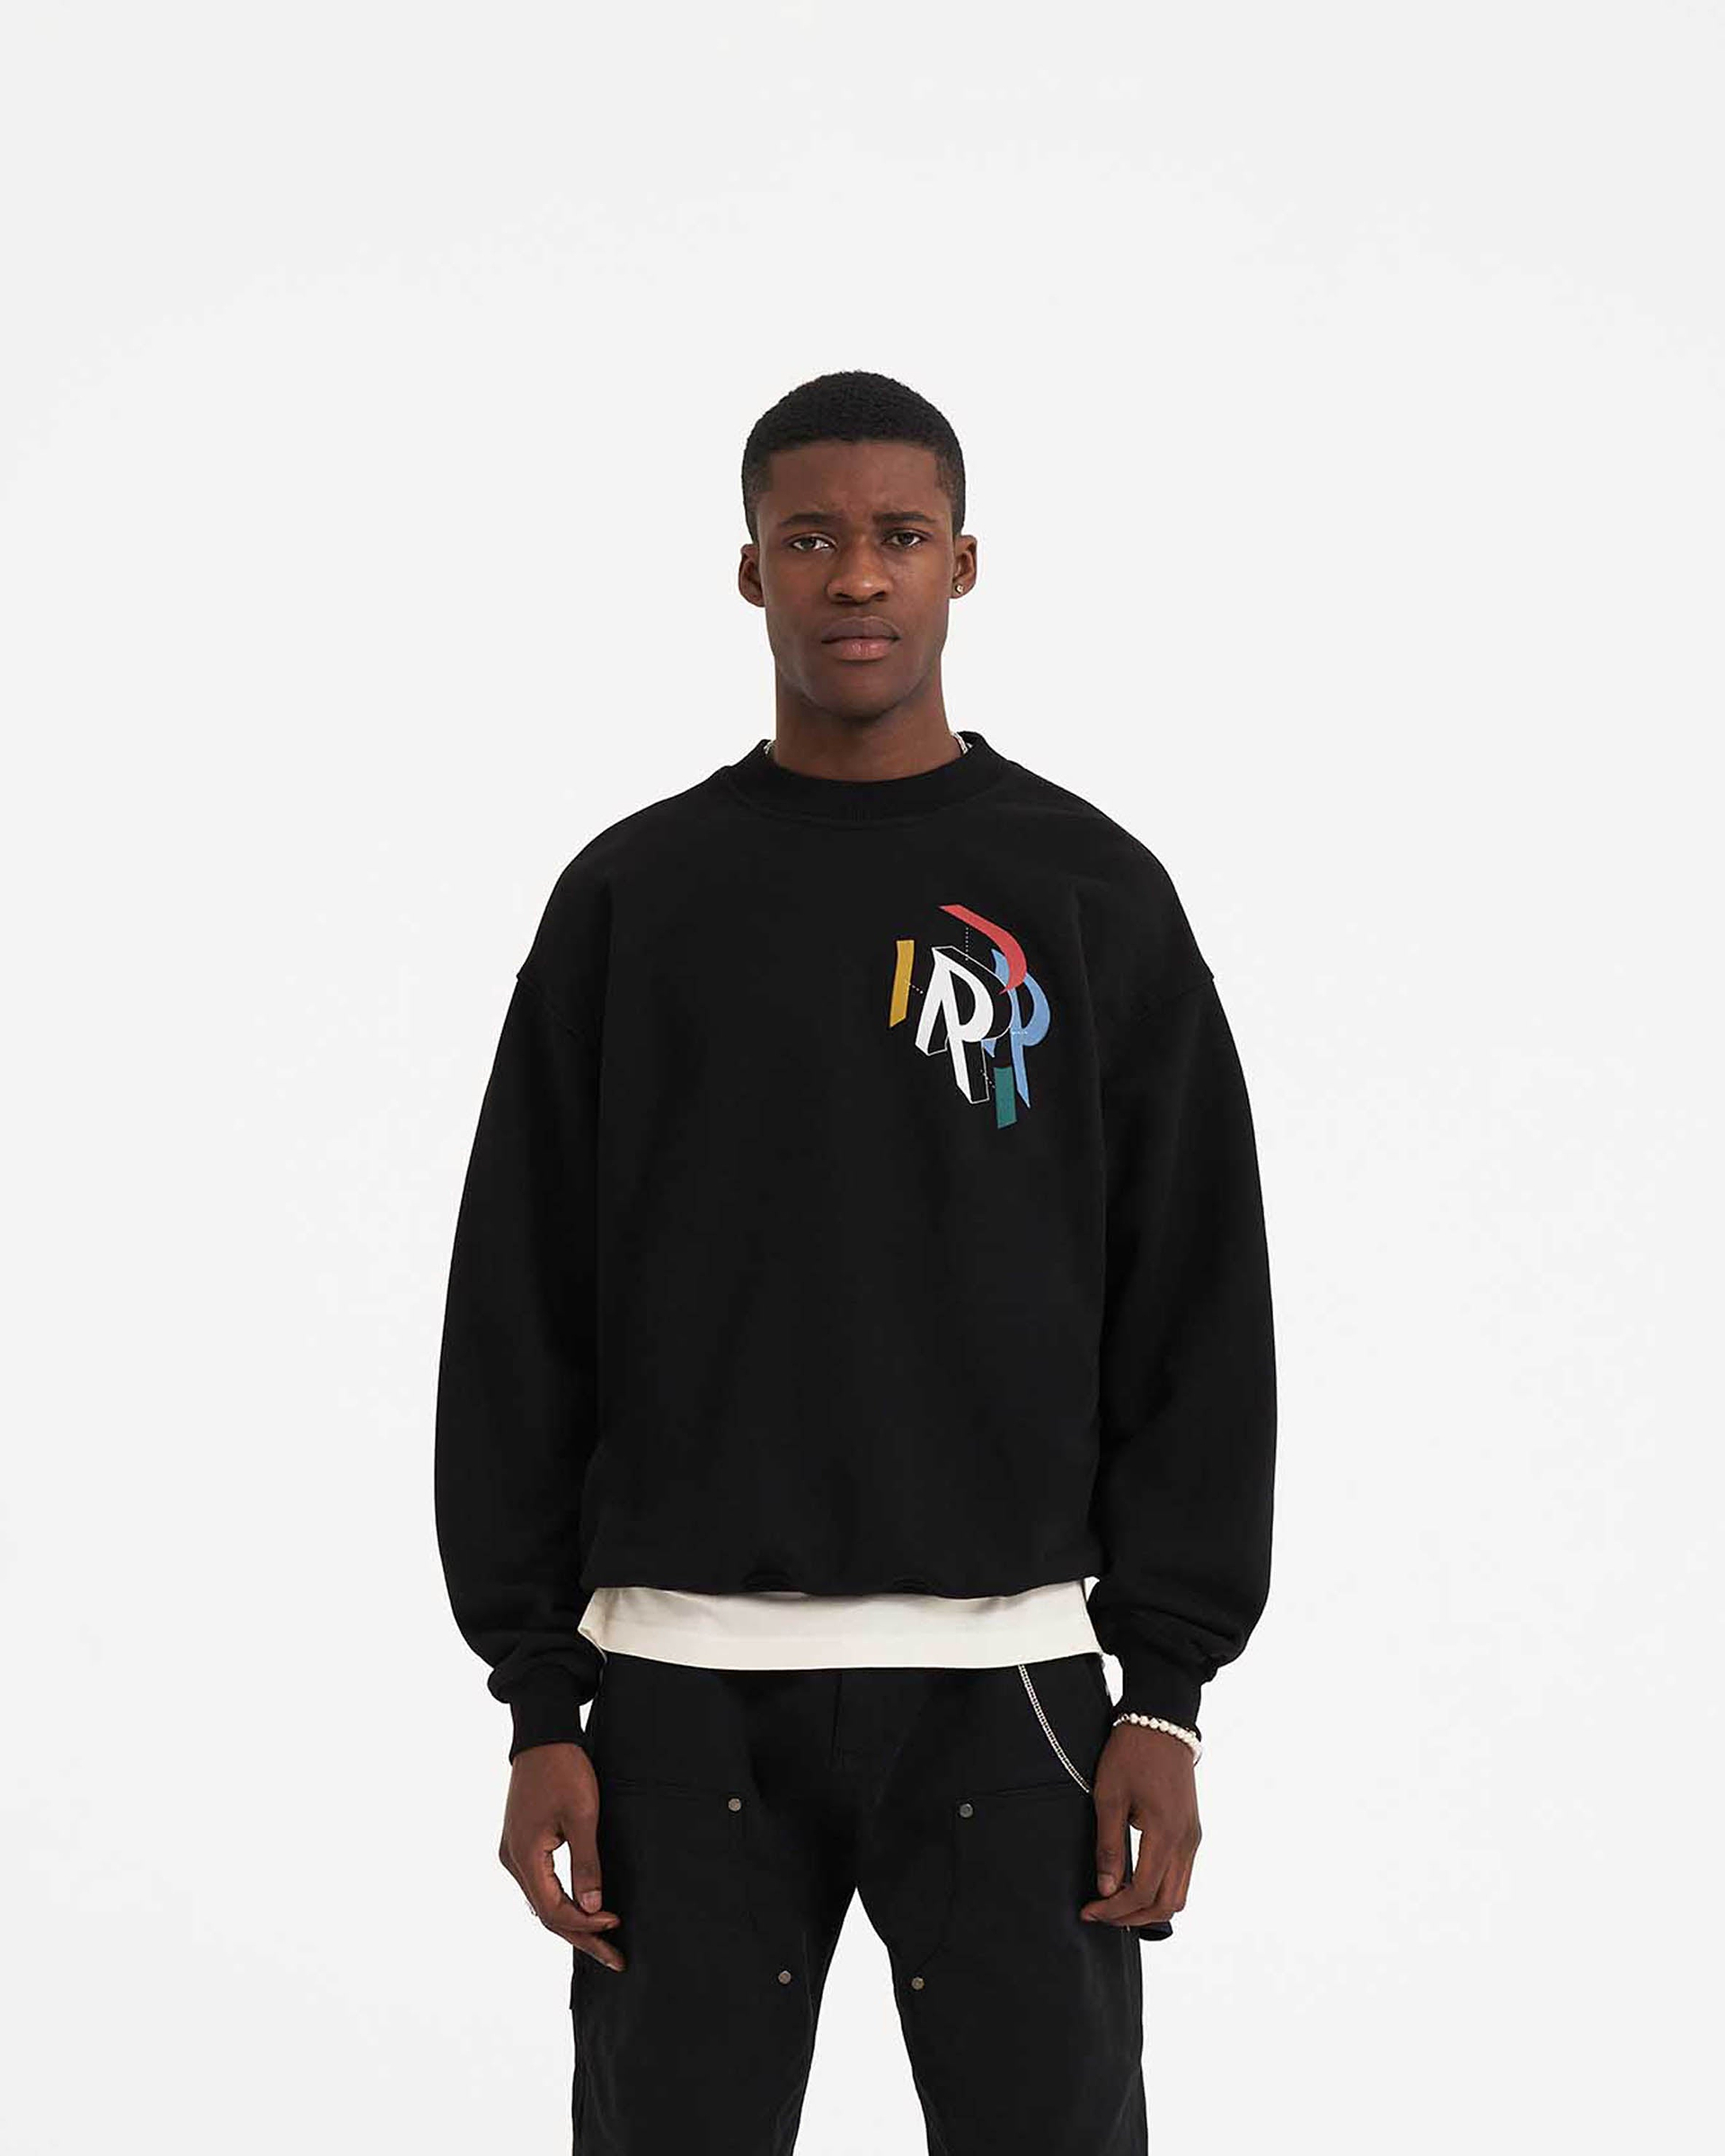 Assembly | Initial Black Sweater | REPRESENT CLO